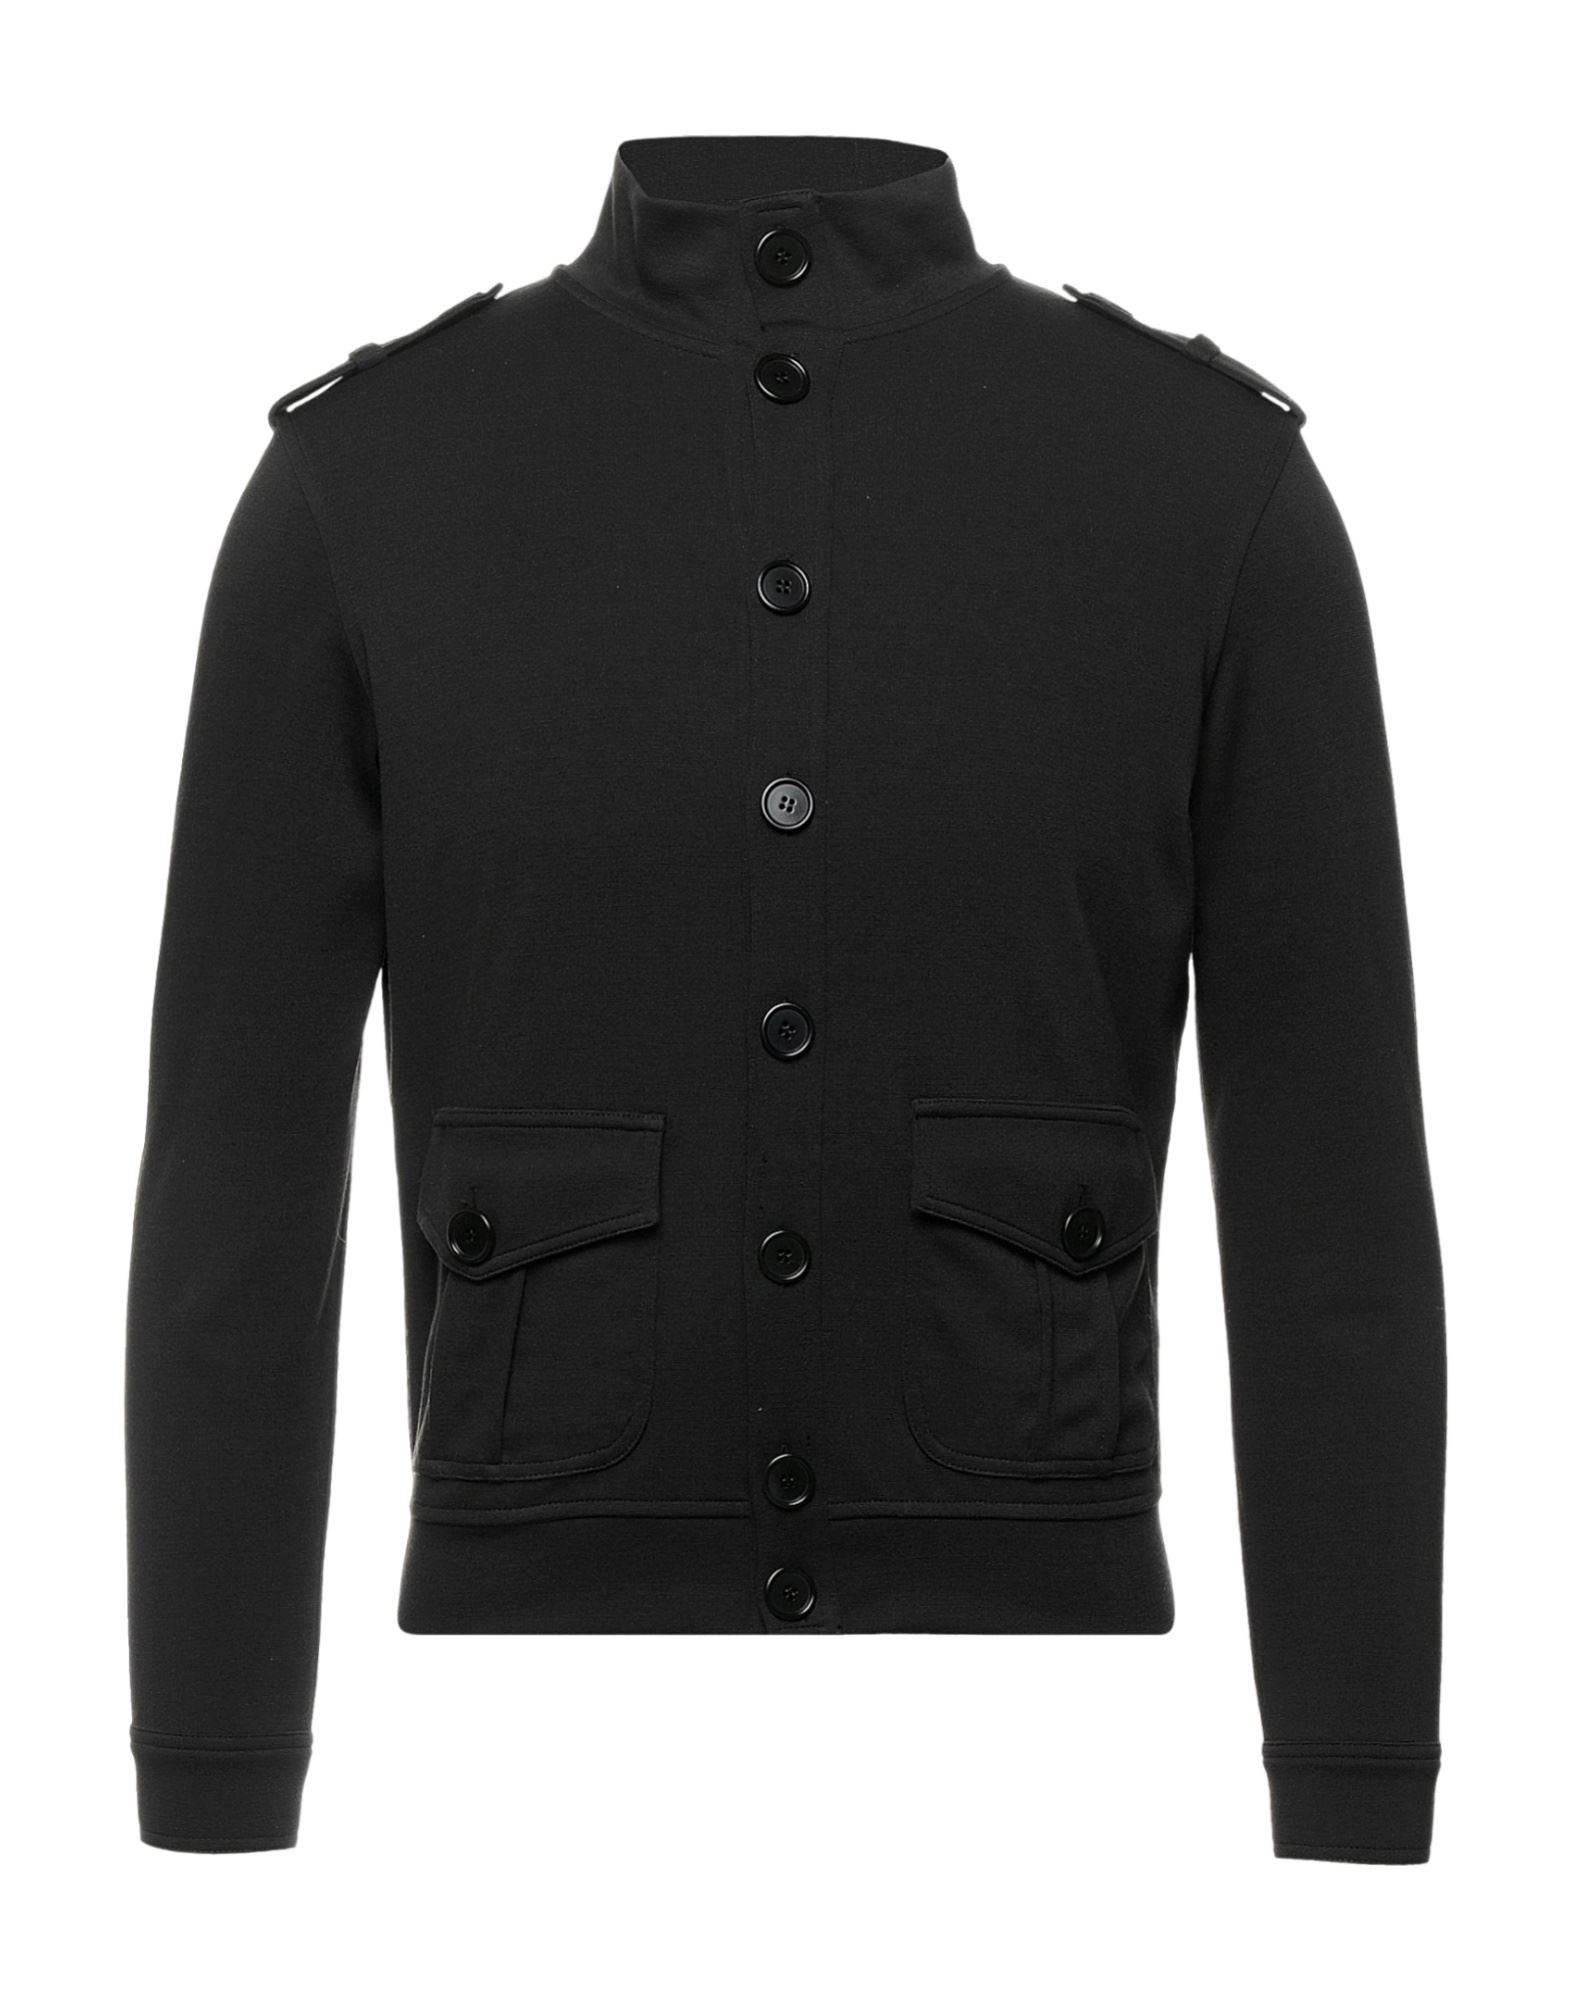 Selezione Basica Suit Jackets In Black